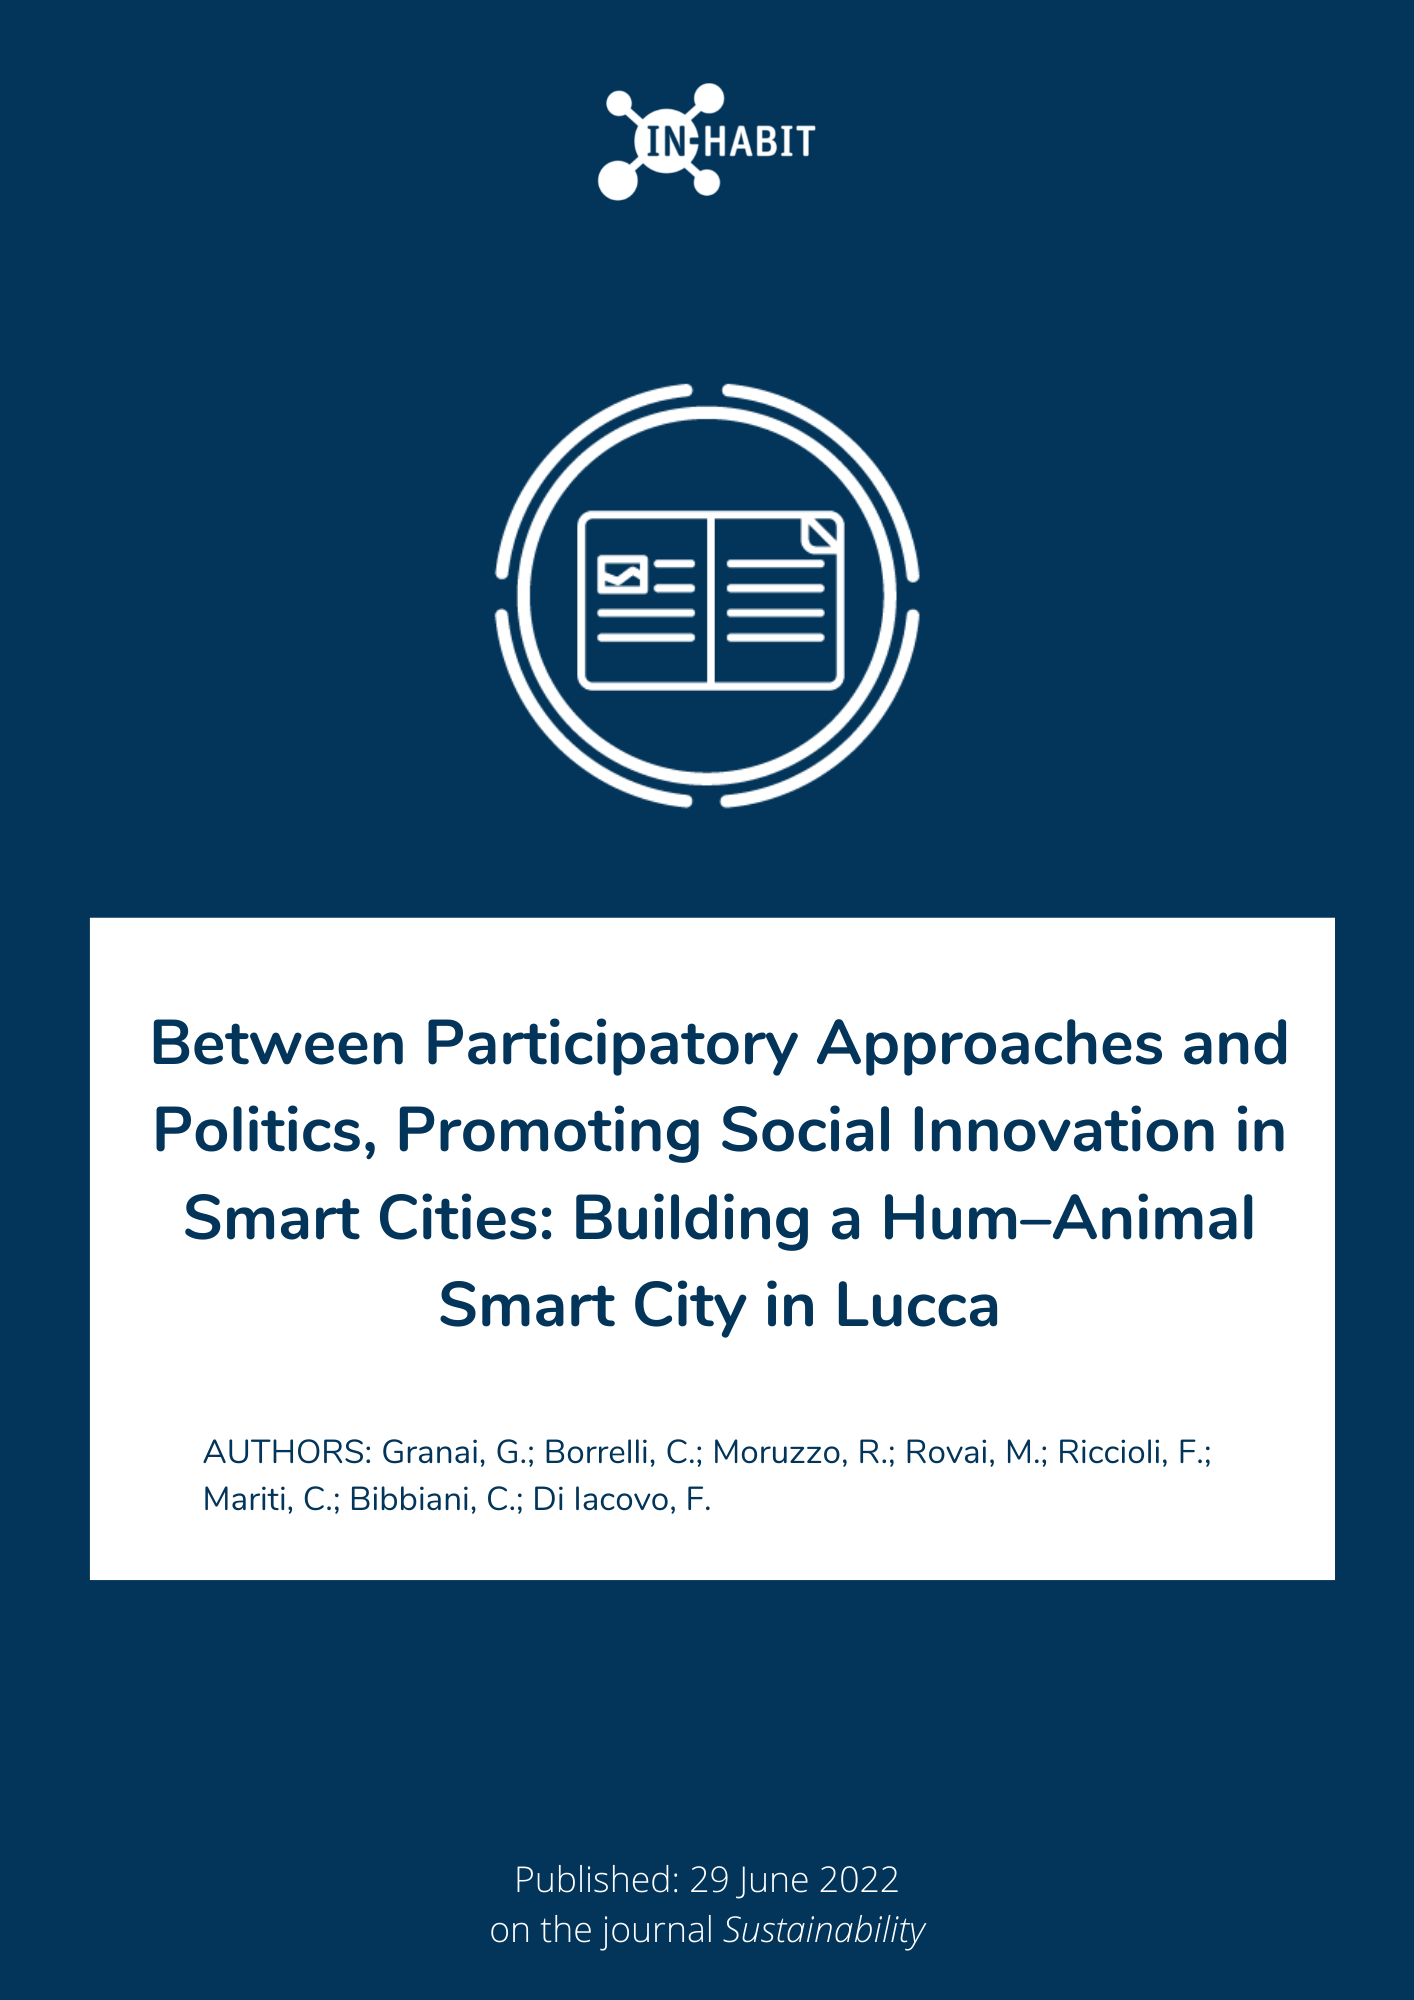 Between Participatory Approaches and Politics, Promoting Social Innovation in Smart Cities Building a Hum–Animal Smart City in Lucca